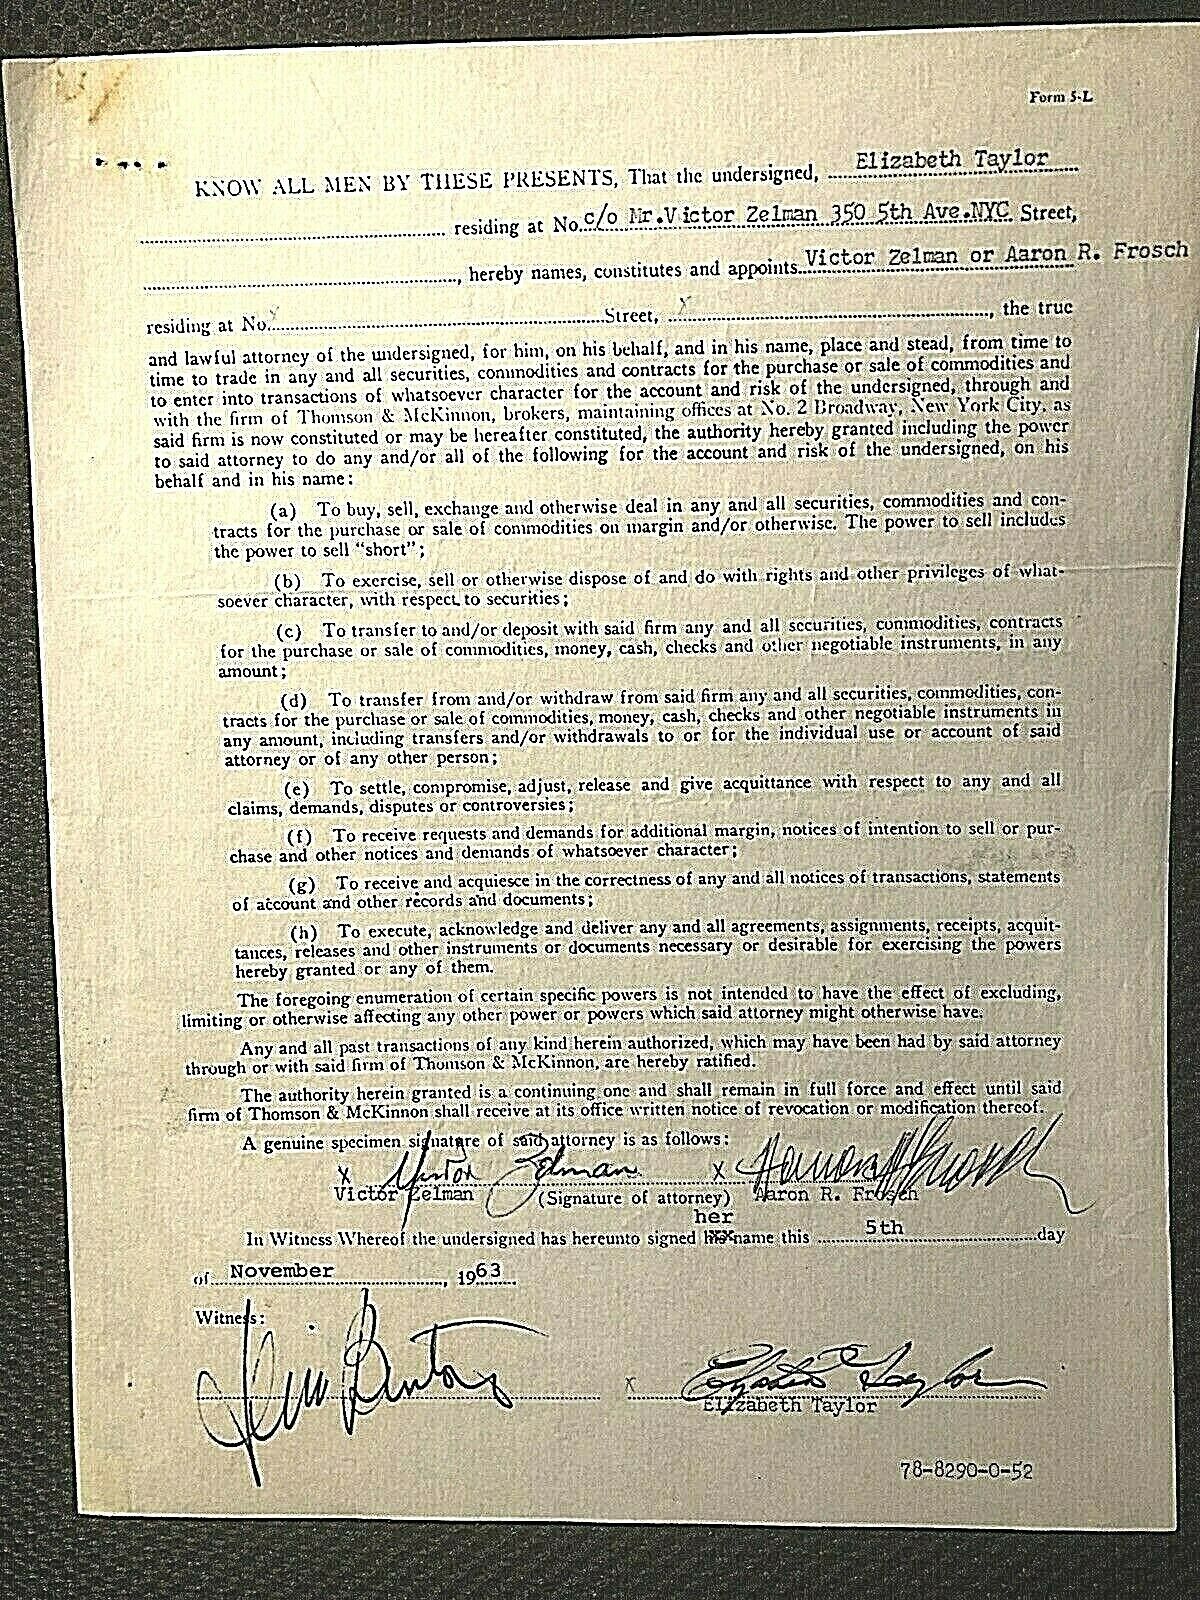 ELIZABETH TAYLOR SIGNED INSANELY RARE ORIG. 1963 "POWER OF ATTORNEY" DOCUMENT!!! Без бренда